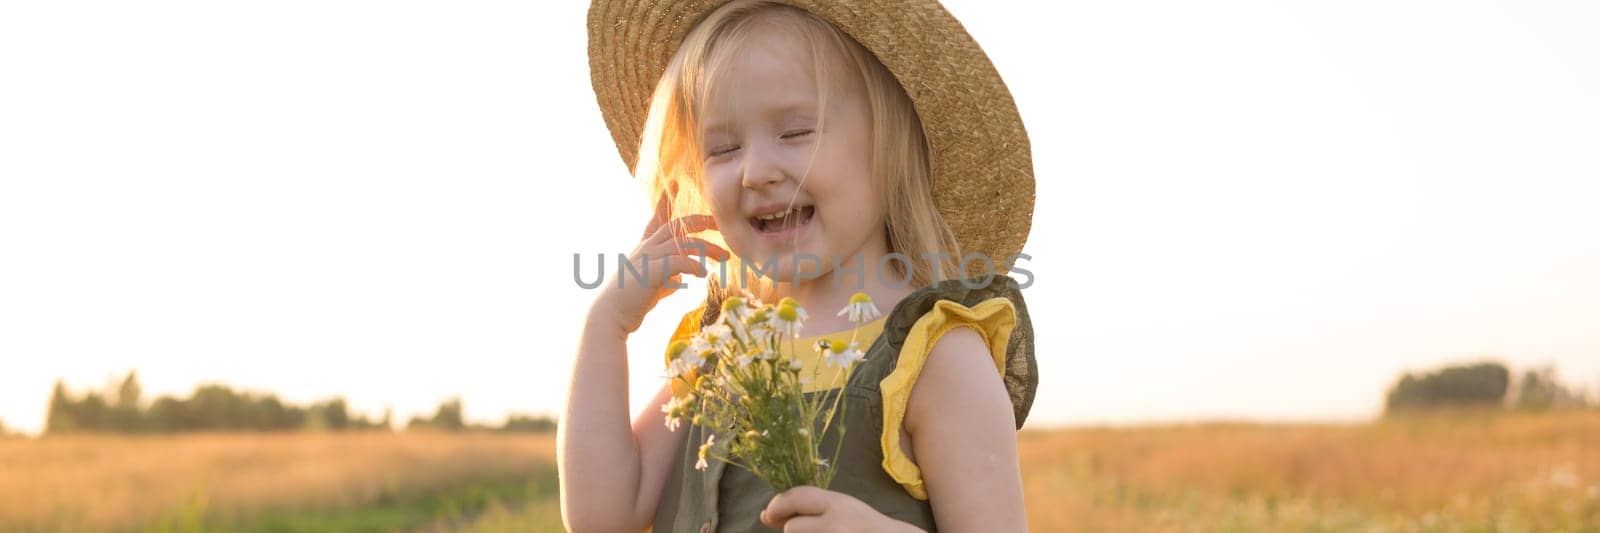 A little blonde girl in a straw hat walks in a field with a bouquet of daisies. The concept of walking in nature, freedom and an eco-friendly lifestyle.